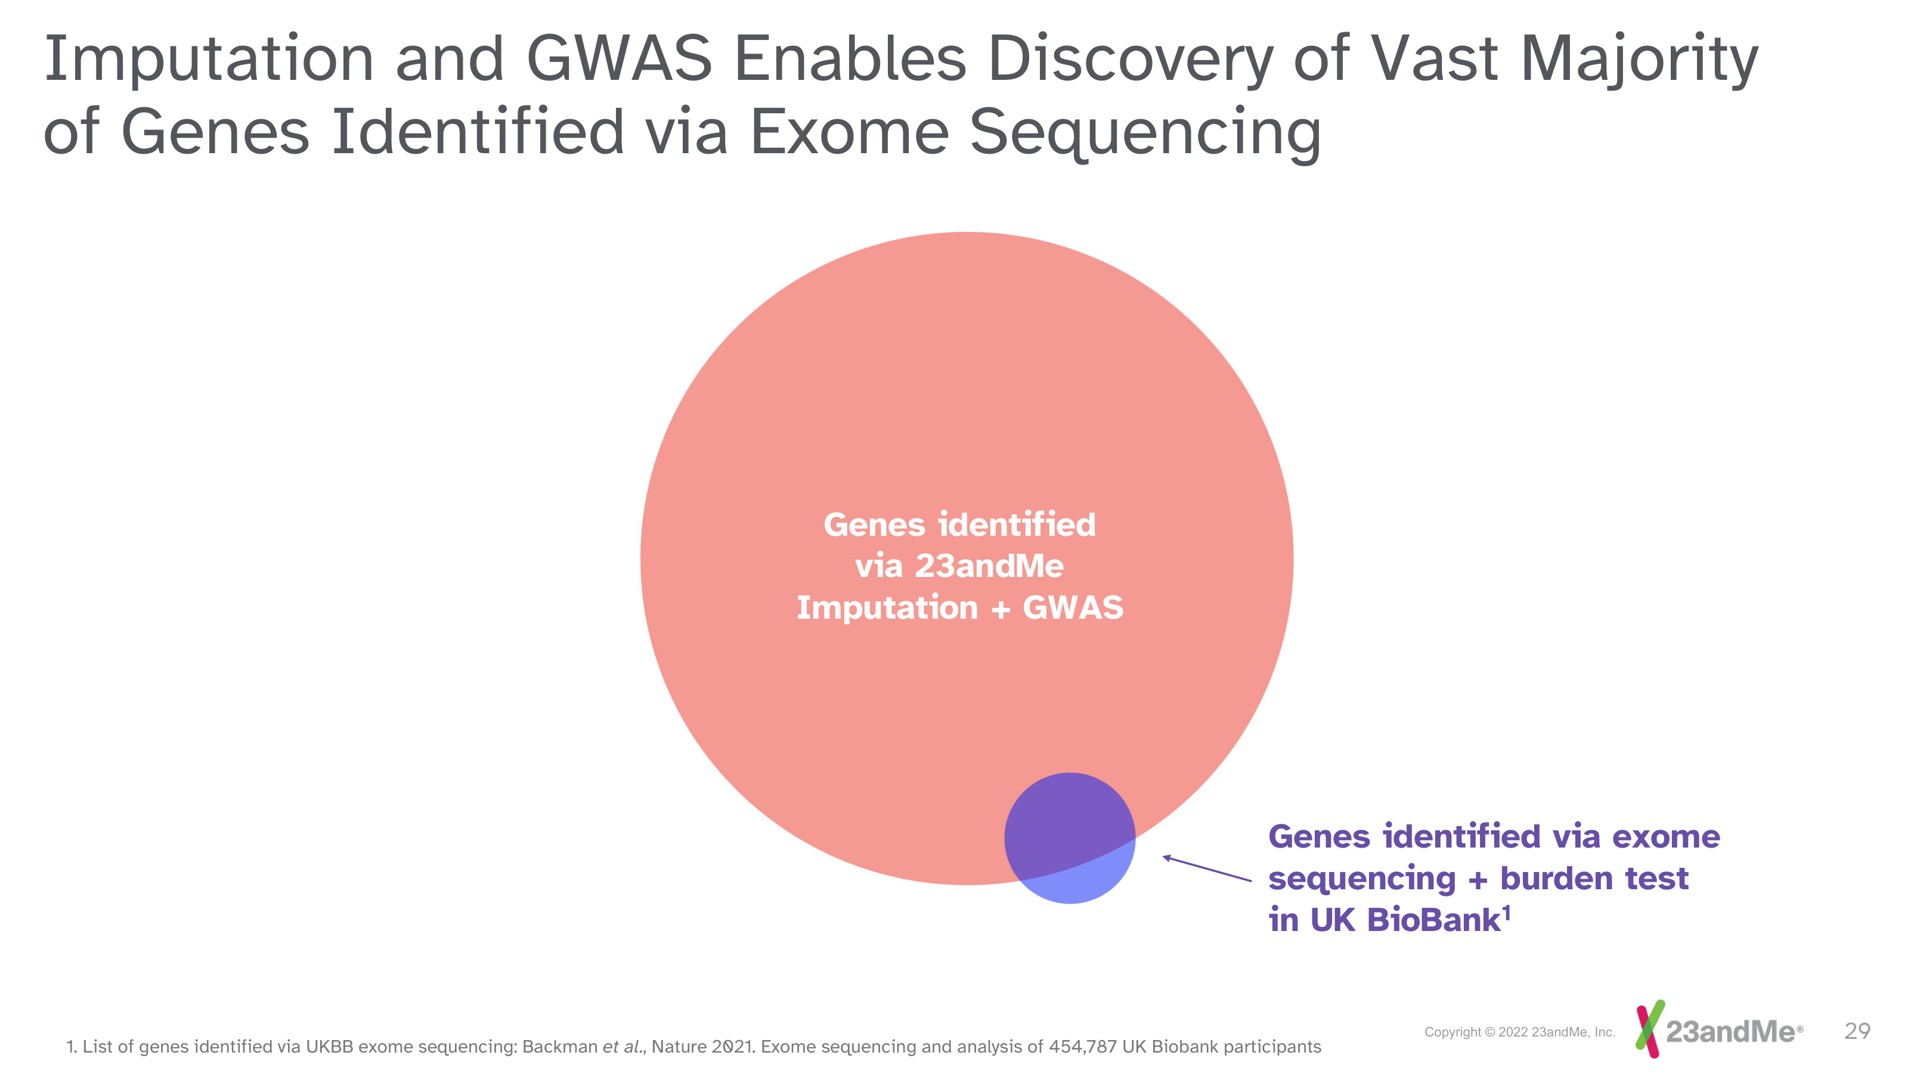 imputation and enables discovery of vast majority of genes identified via sequencing | 23andMe